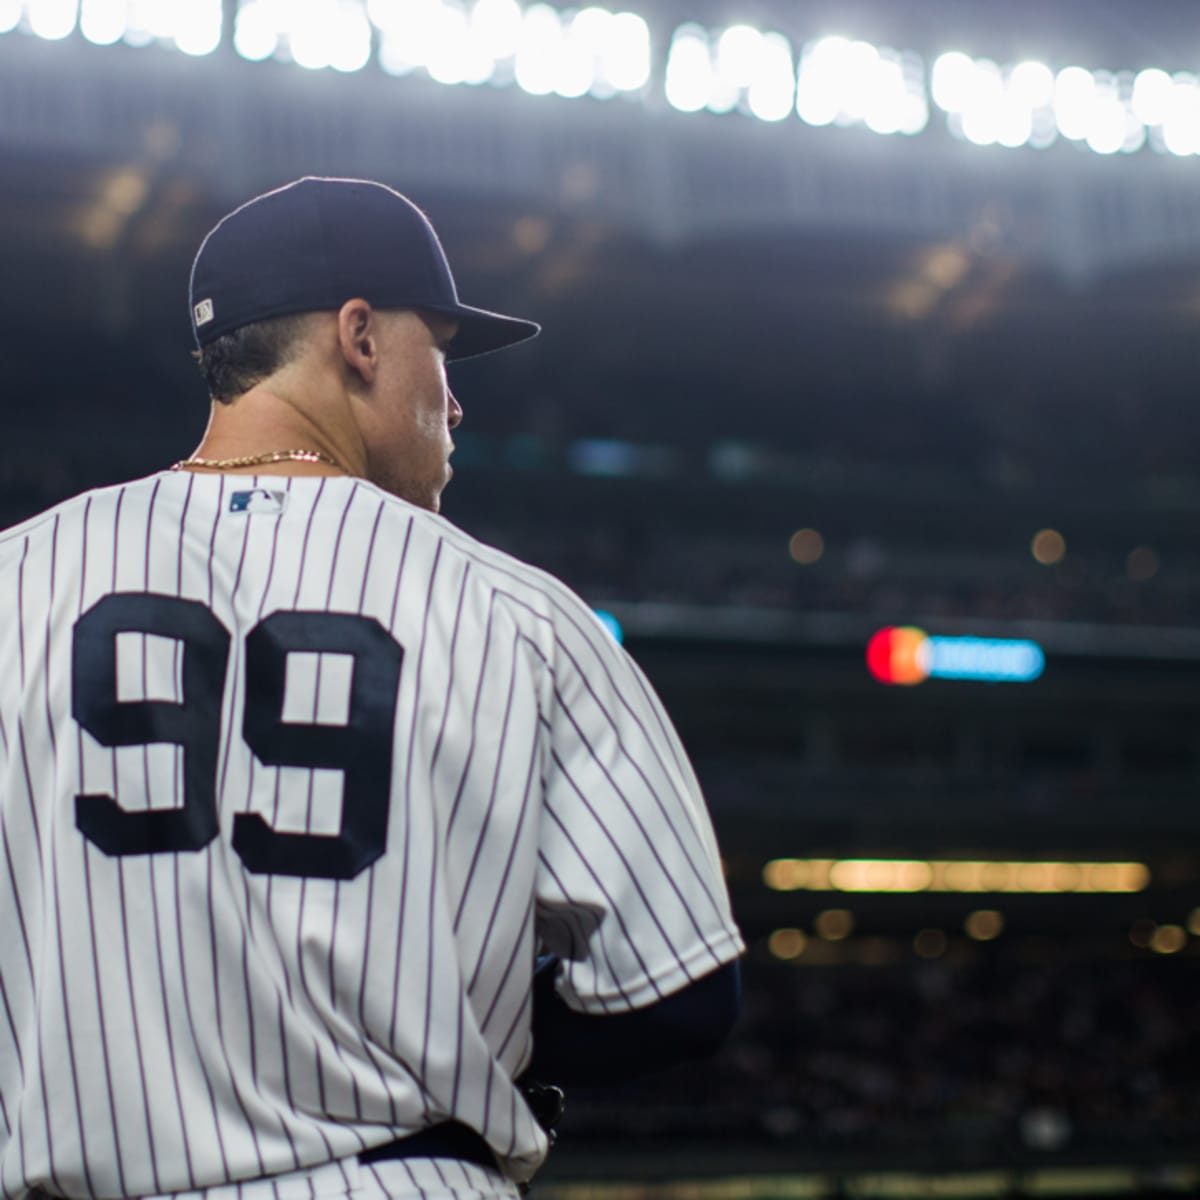 Yankees To Feature Names on Back Of Jerseys For Series - Sports Illustrated